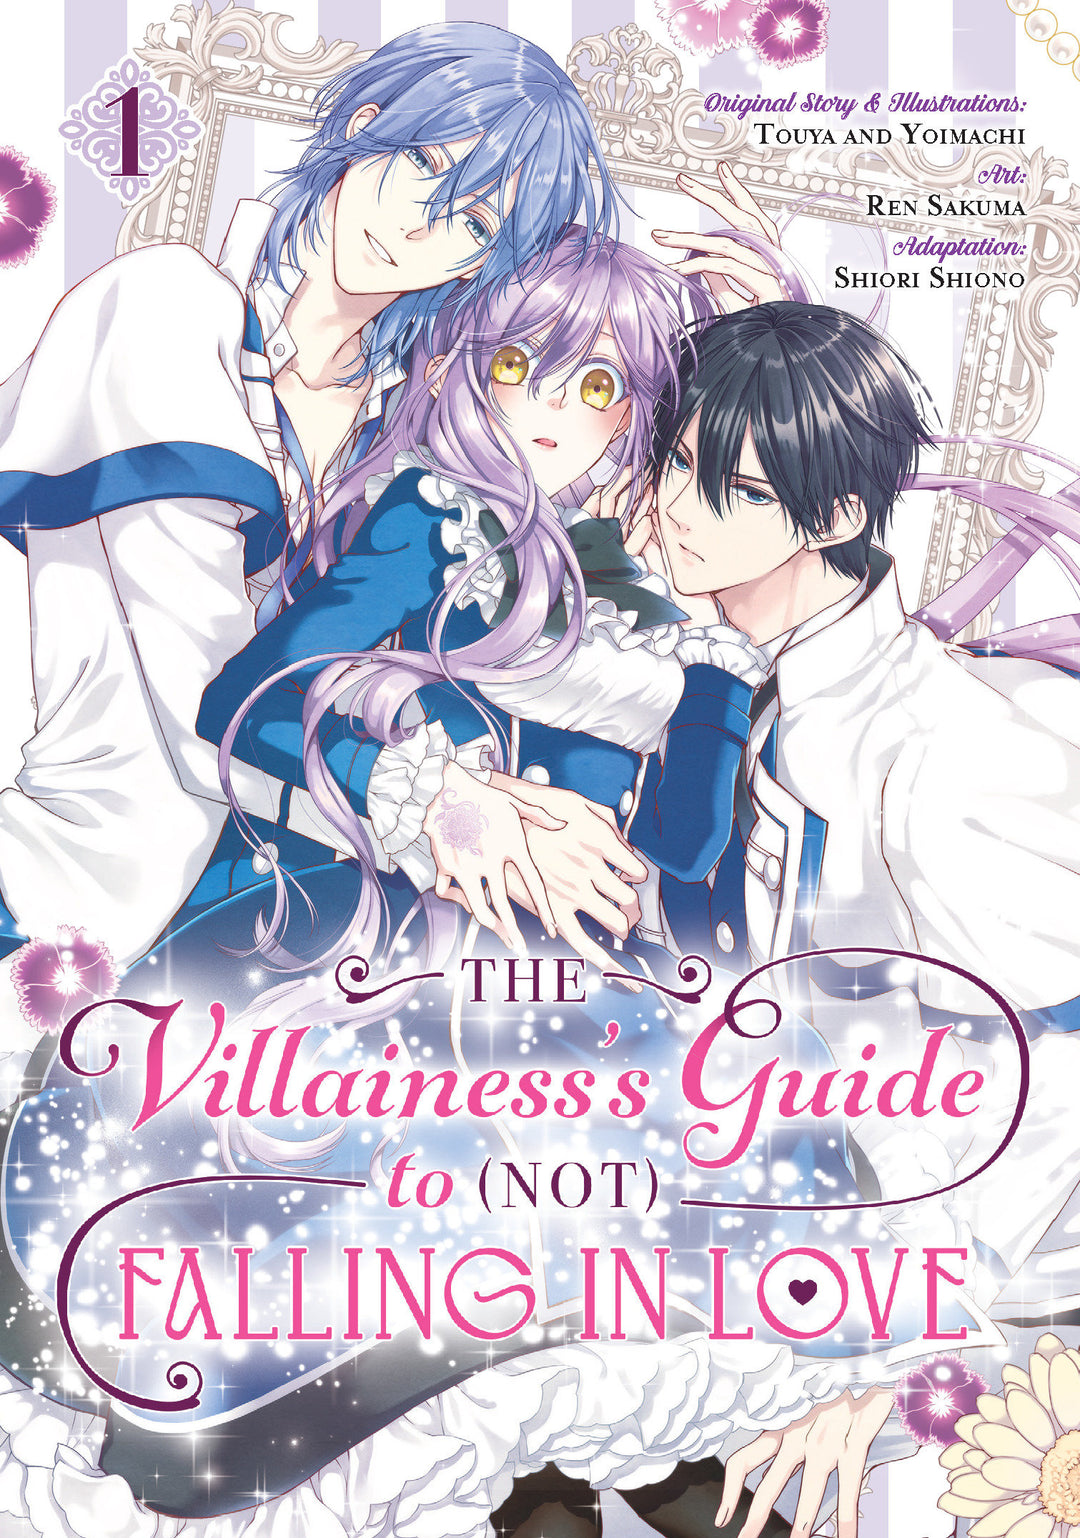 The Villainesss Guide To (Not) Falling In Love 01 (Manga)